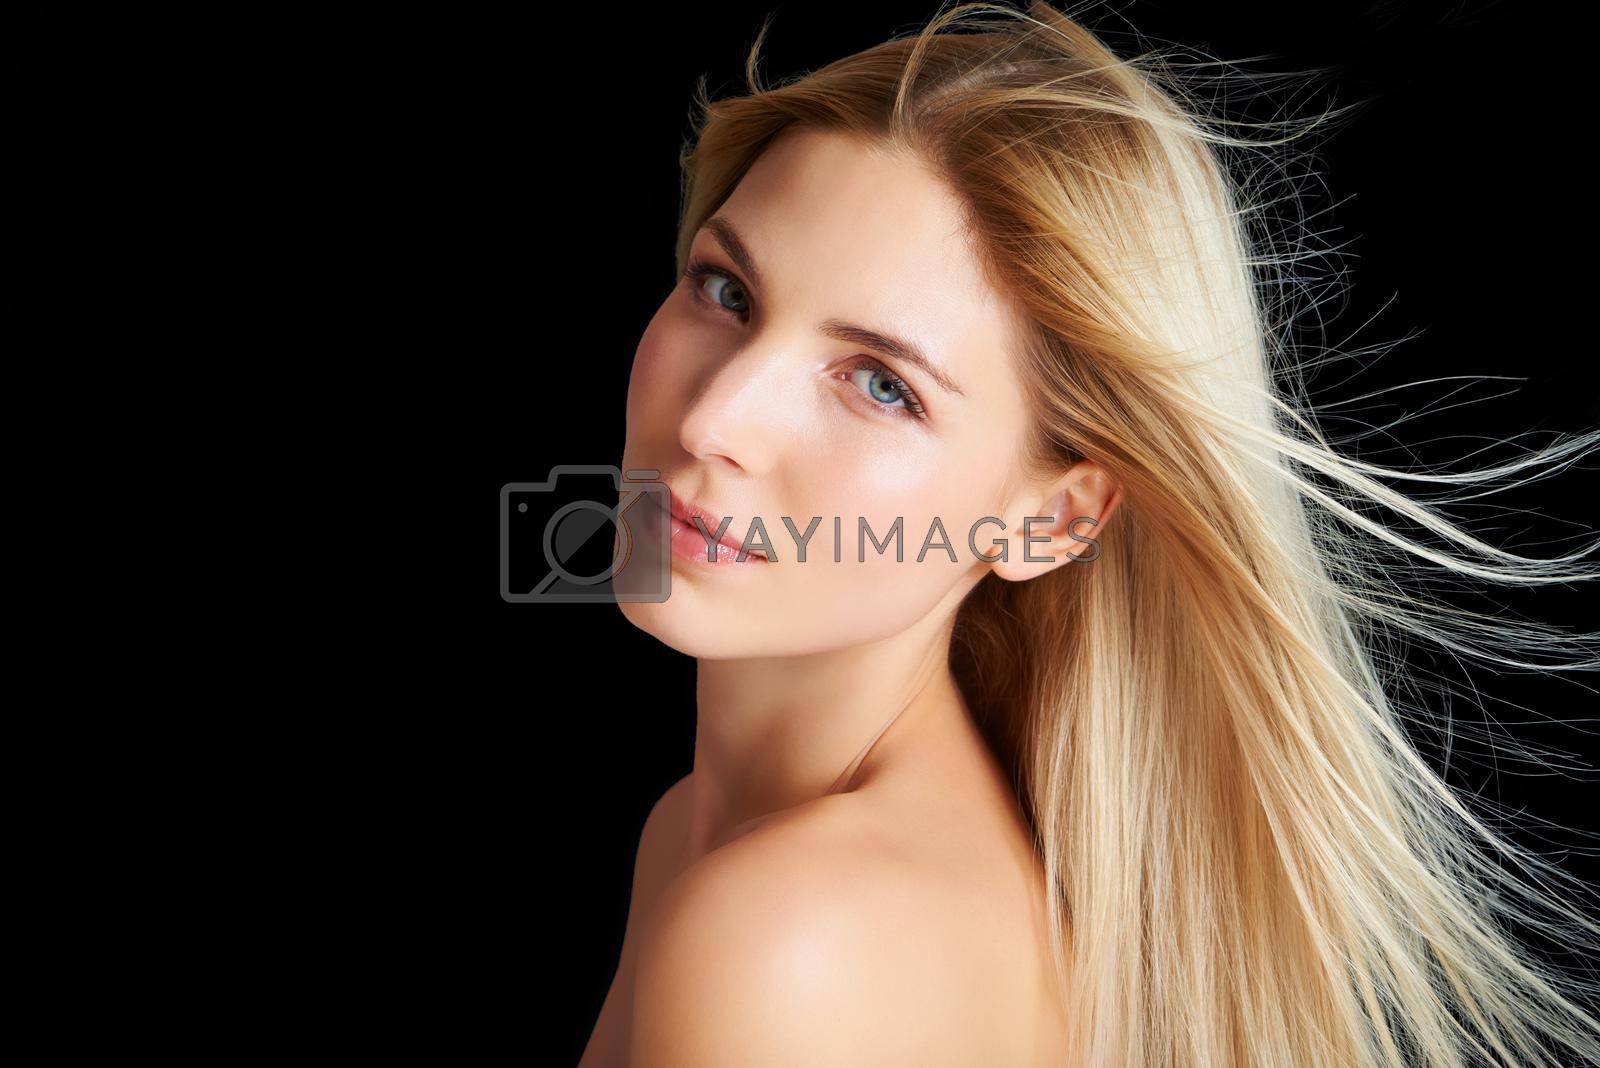 Royalty free image of Beauty is what shes known for. A blonde woman posing in front of a black background while the wind blows through her hair. by YuriArcurs